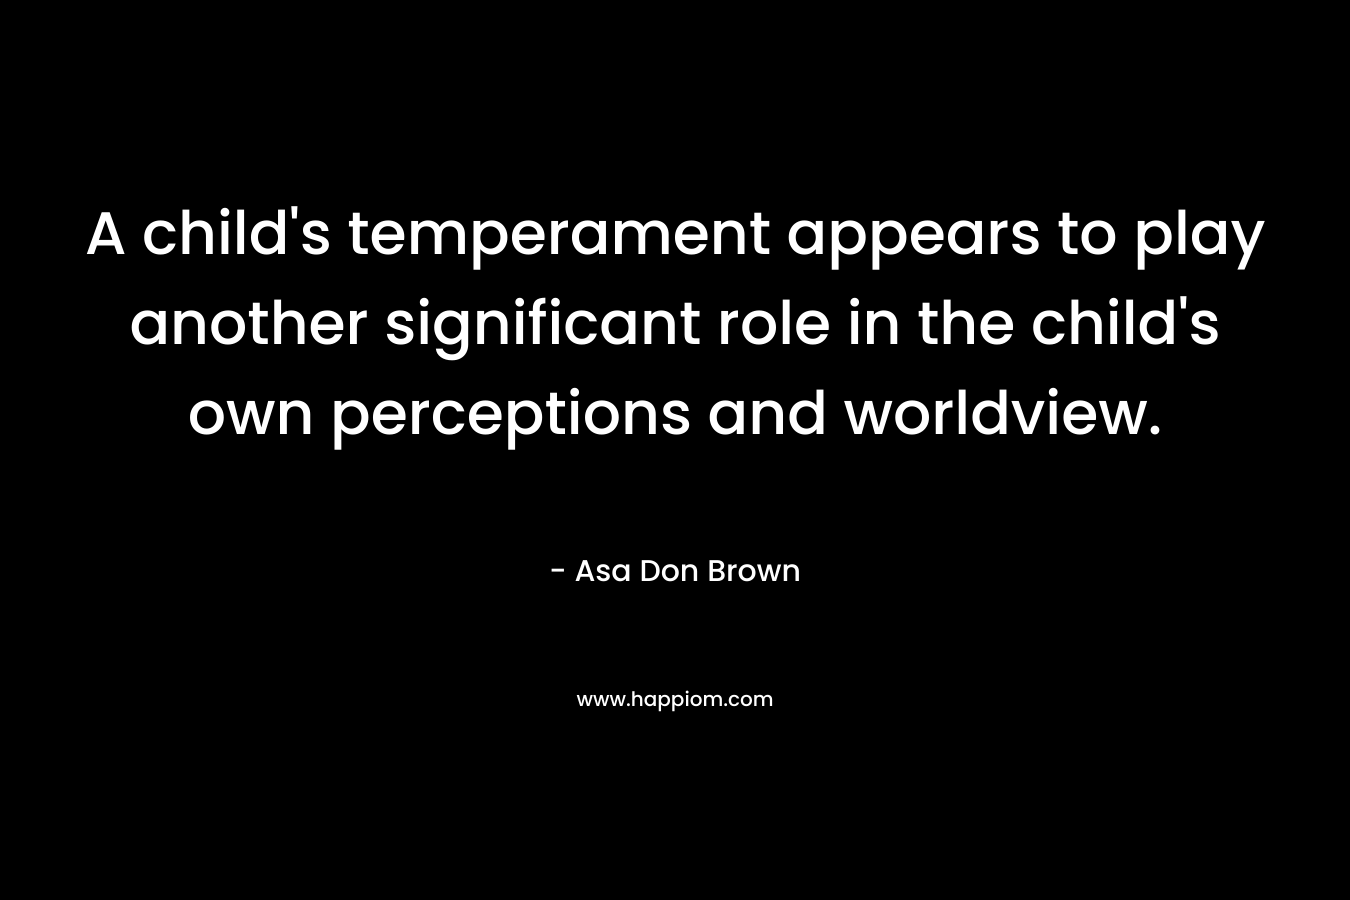 A child’s temperament appears to play another significant role in the child’s own perceptions and worldview. – Asa Don Brown